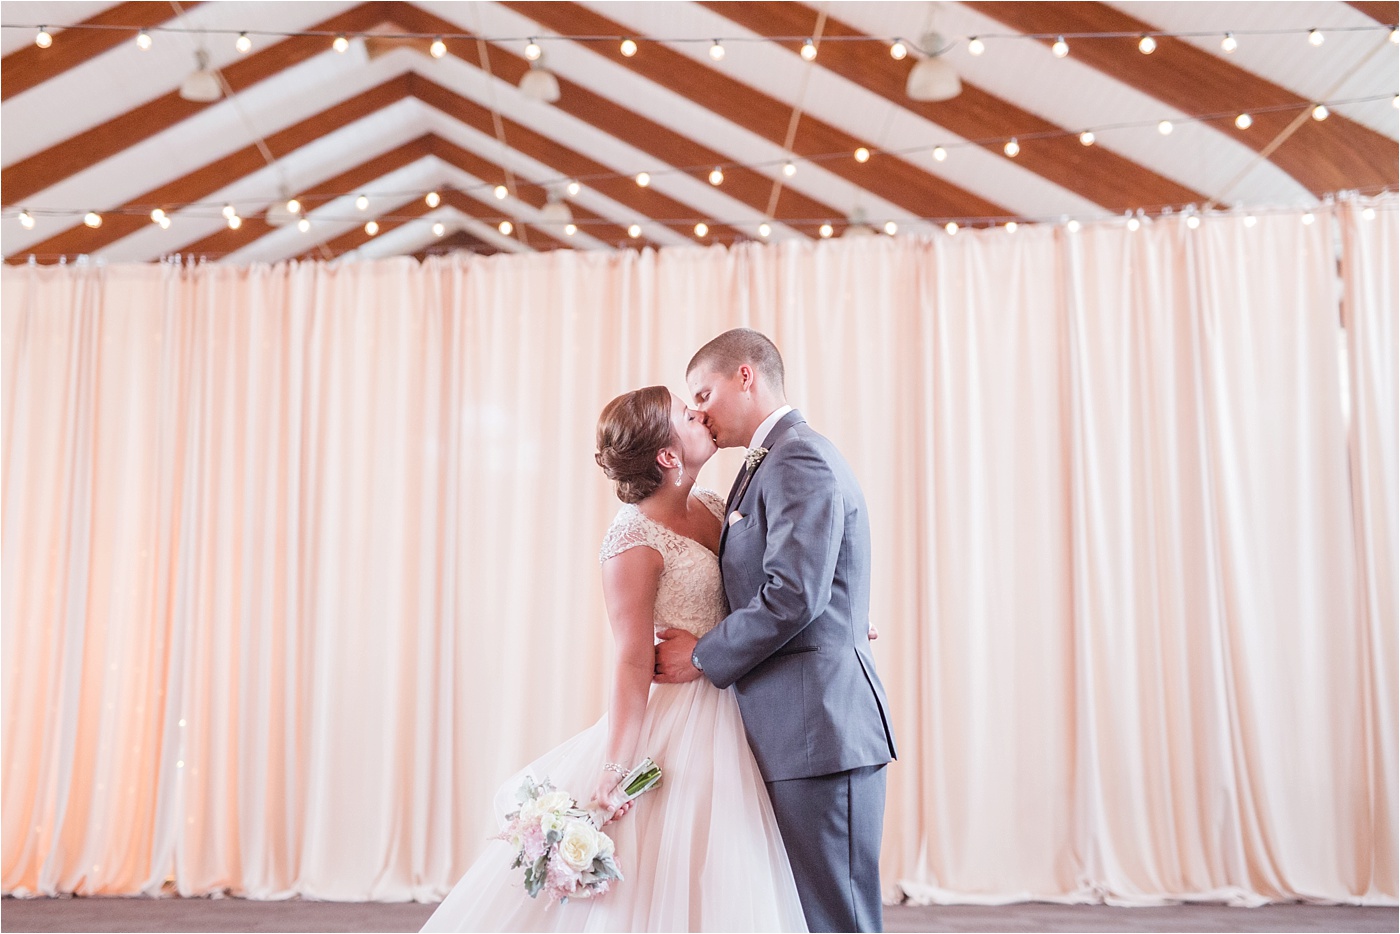 A Blush Outdoor wedding at Irongate Equestrian | KariMe Photography_0098